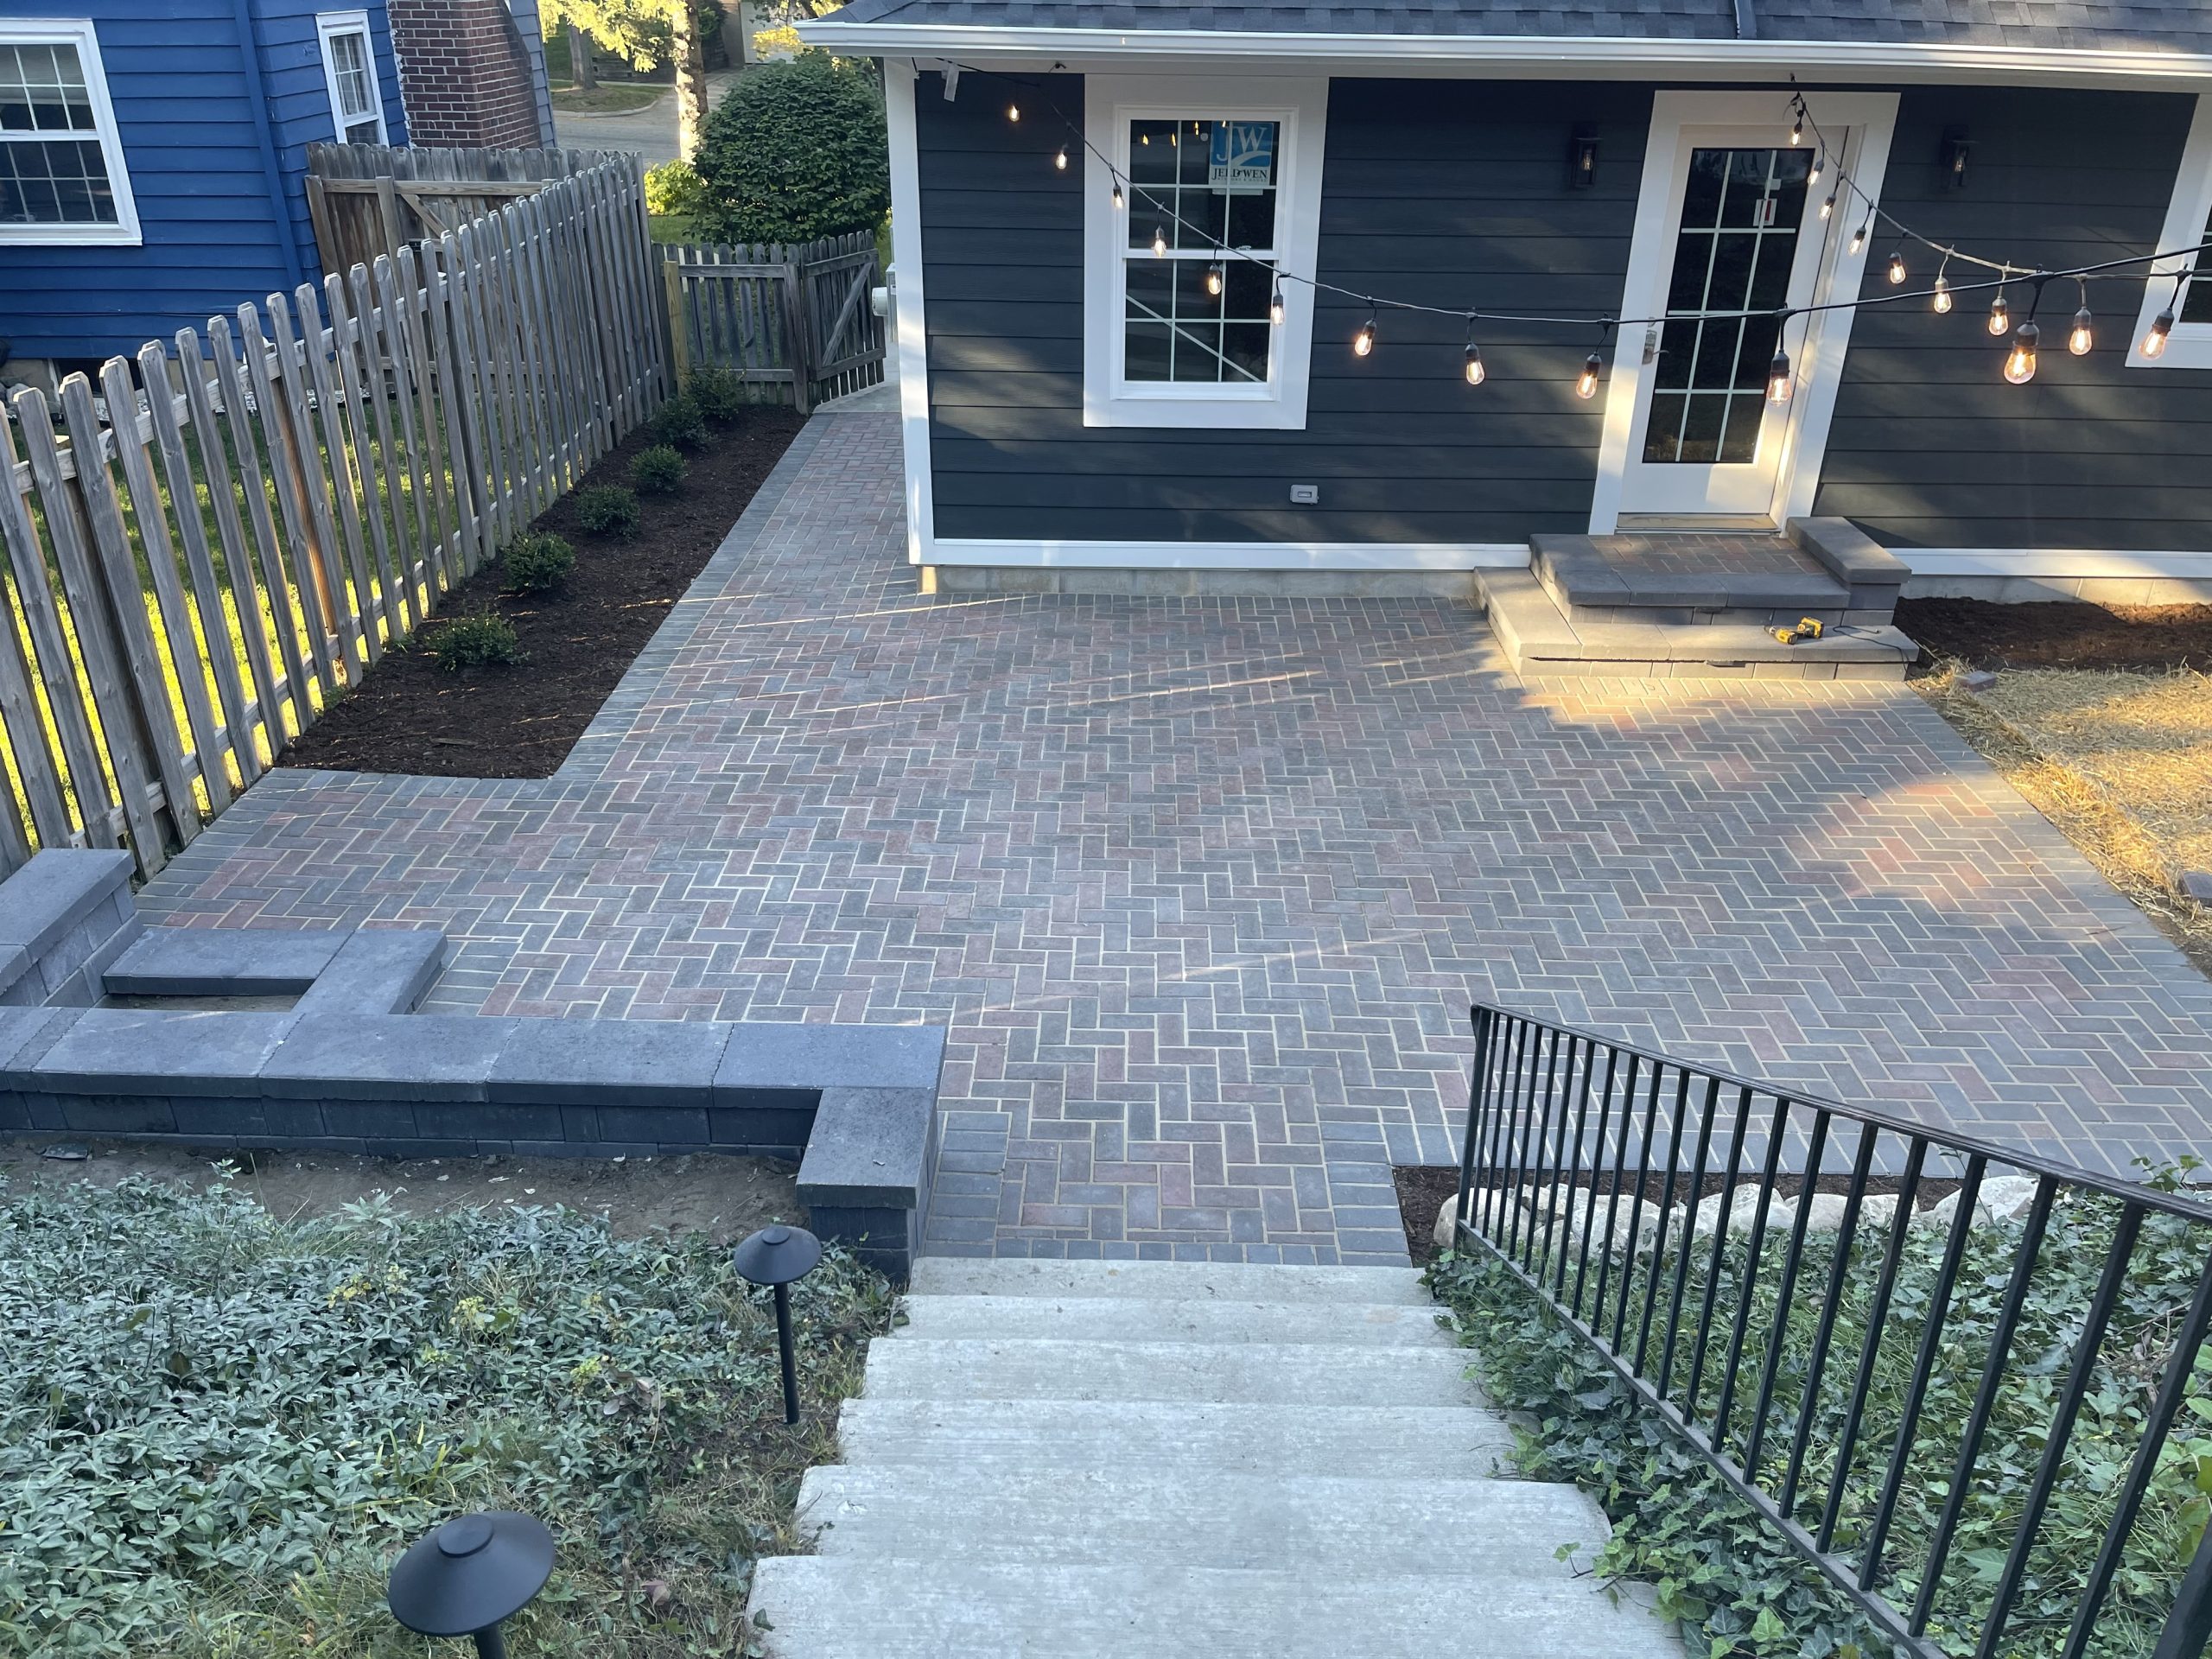 Finished Patio Project by Twin Oaks Landscape in Ann Arbor, Michigan